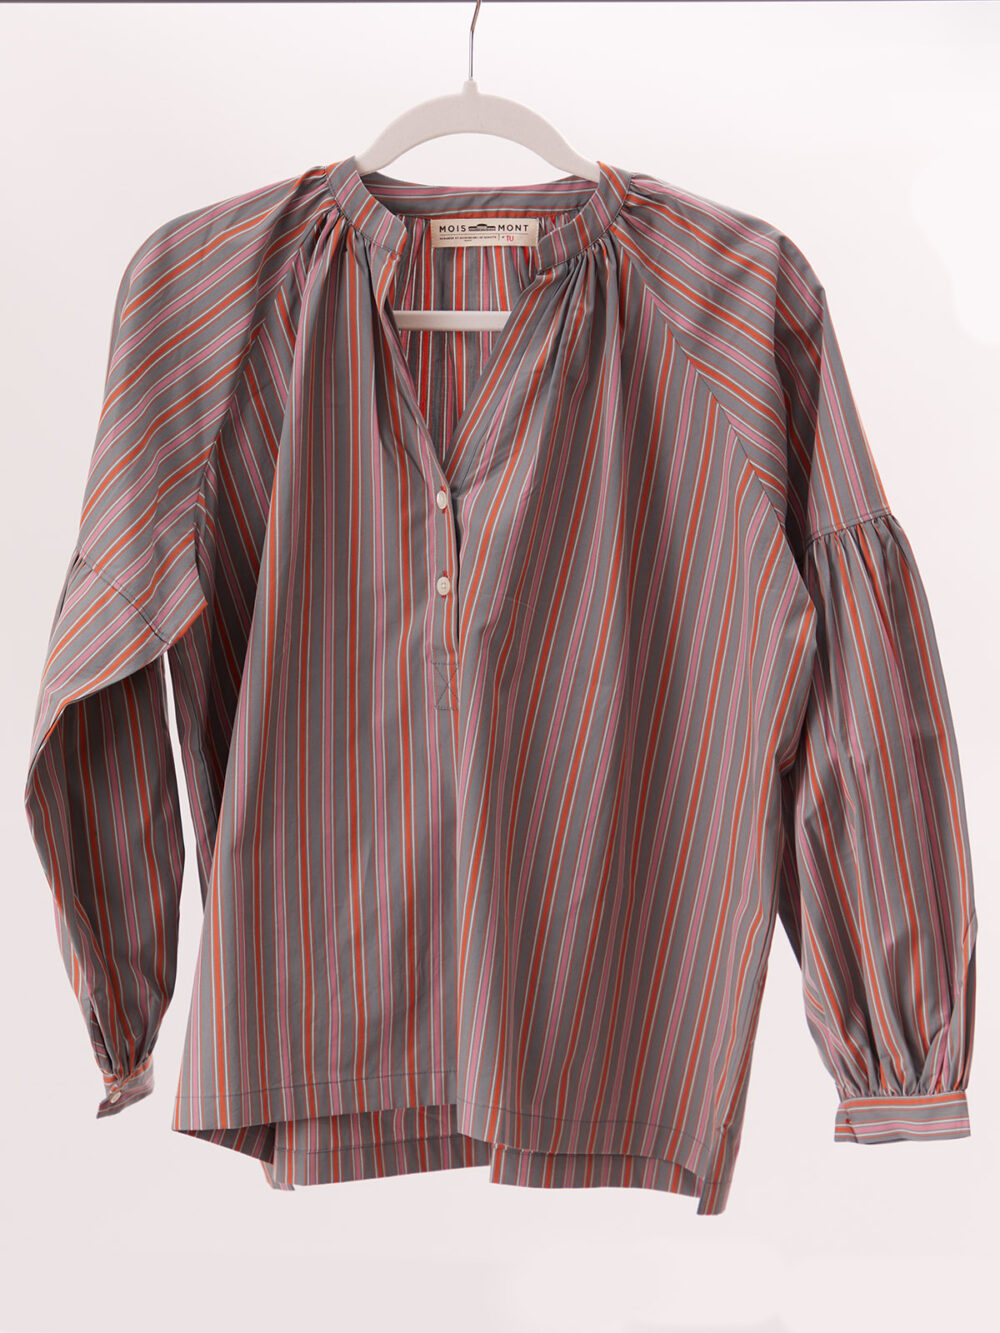 striped summer blouse with gathered neckline.